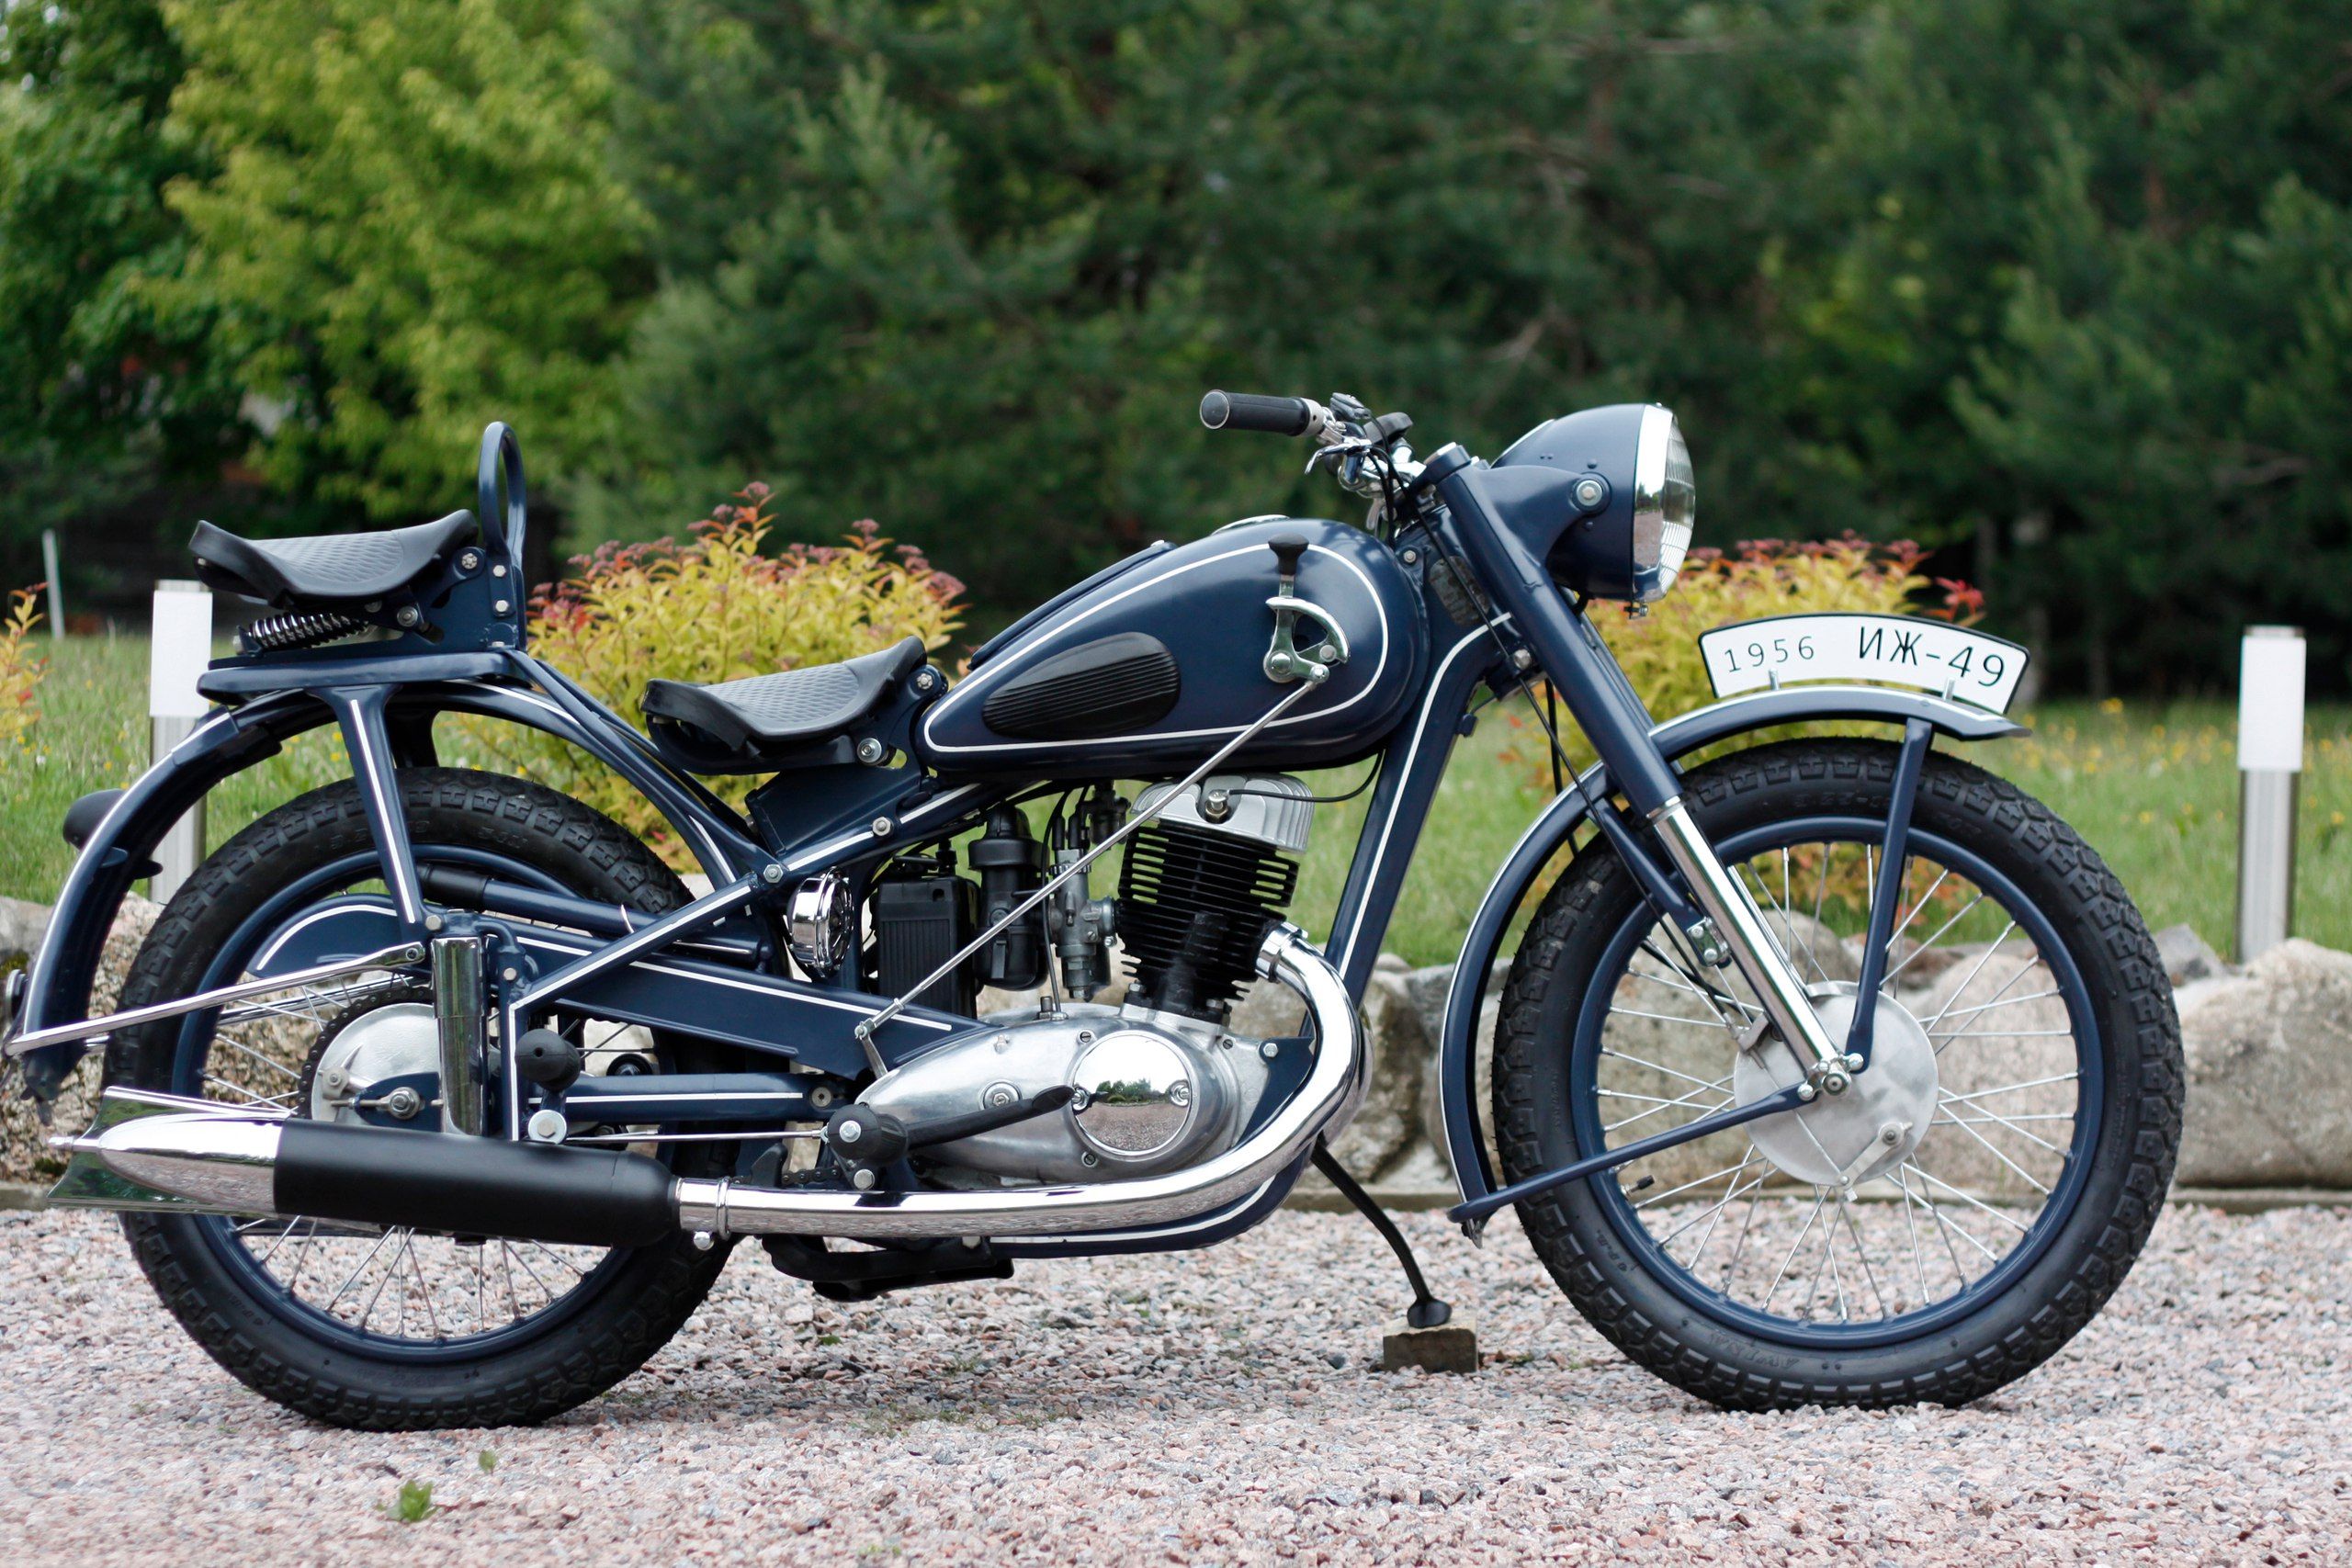 Izh -49 1951-1958 | motorcycles of the USSR 1920-1930... | Pinterest ...